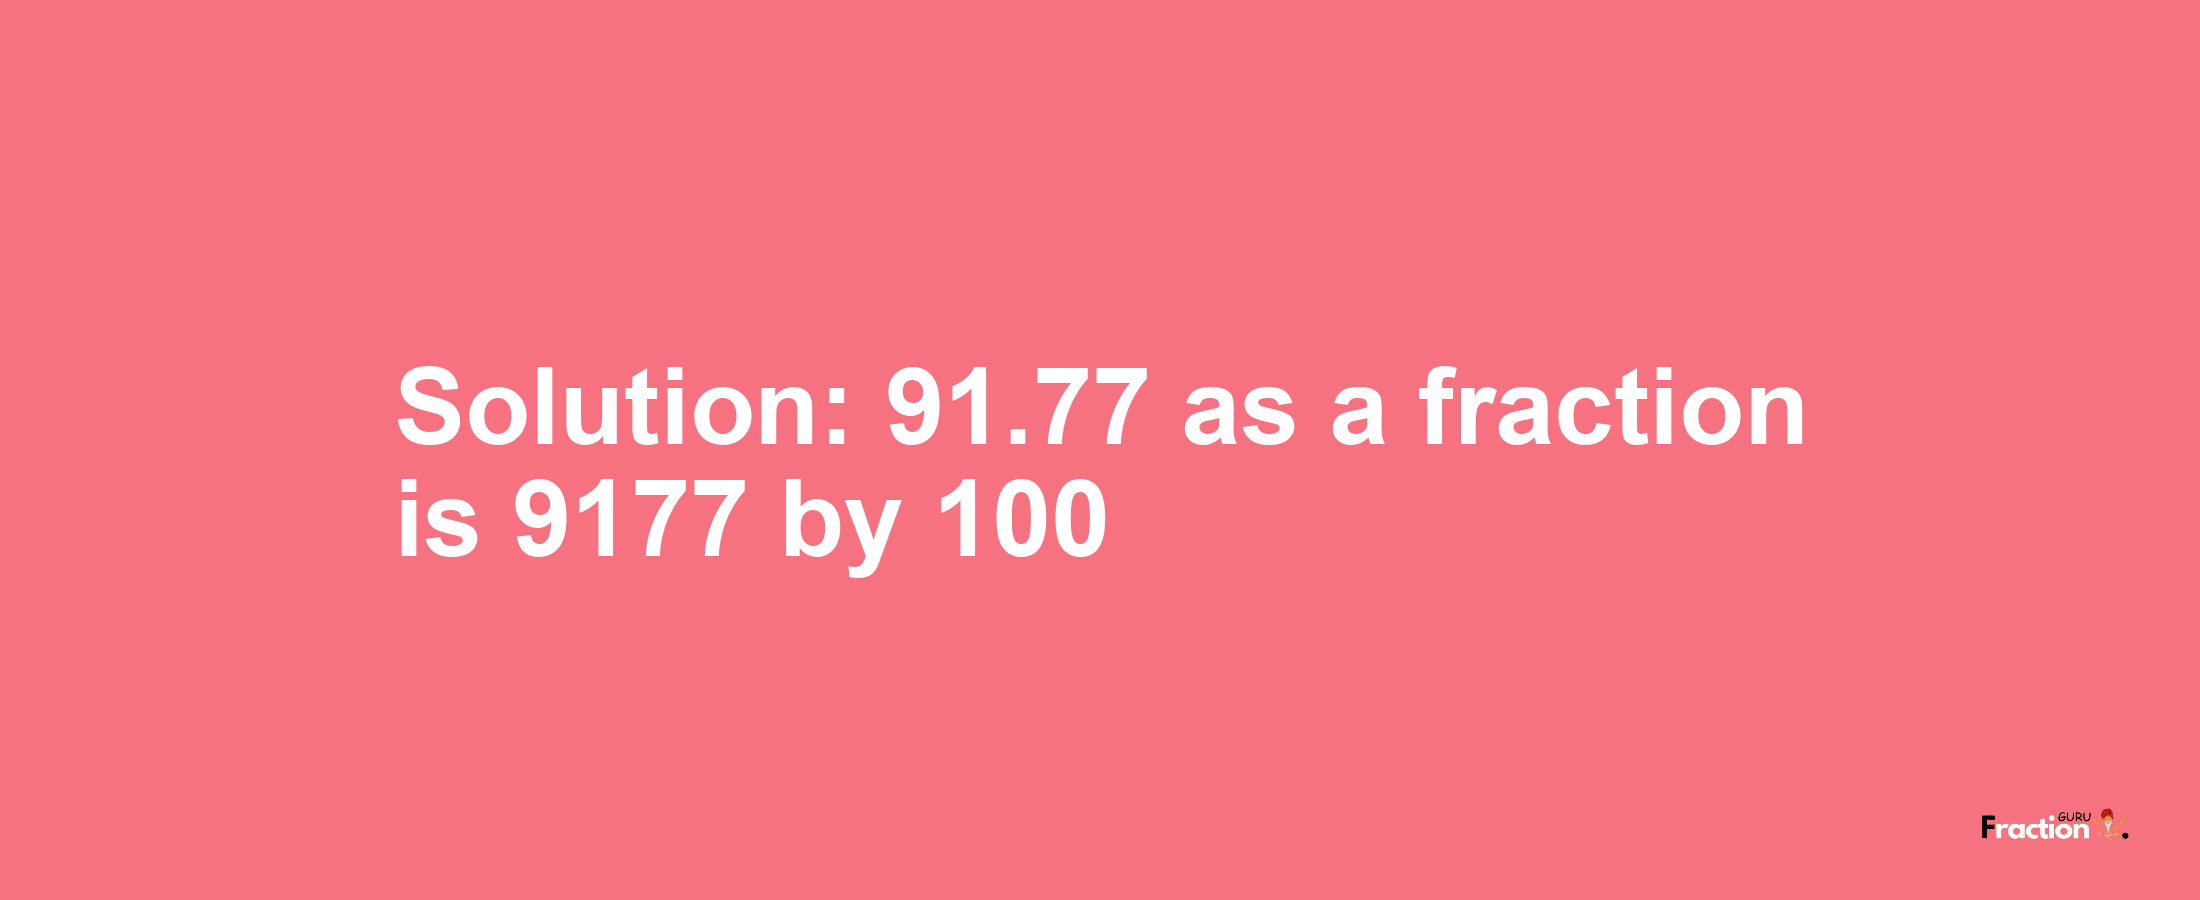 Solution:91.77 as a fraction is 9177/100